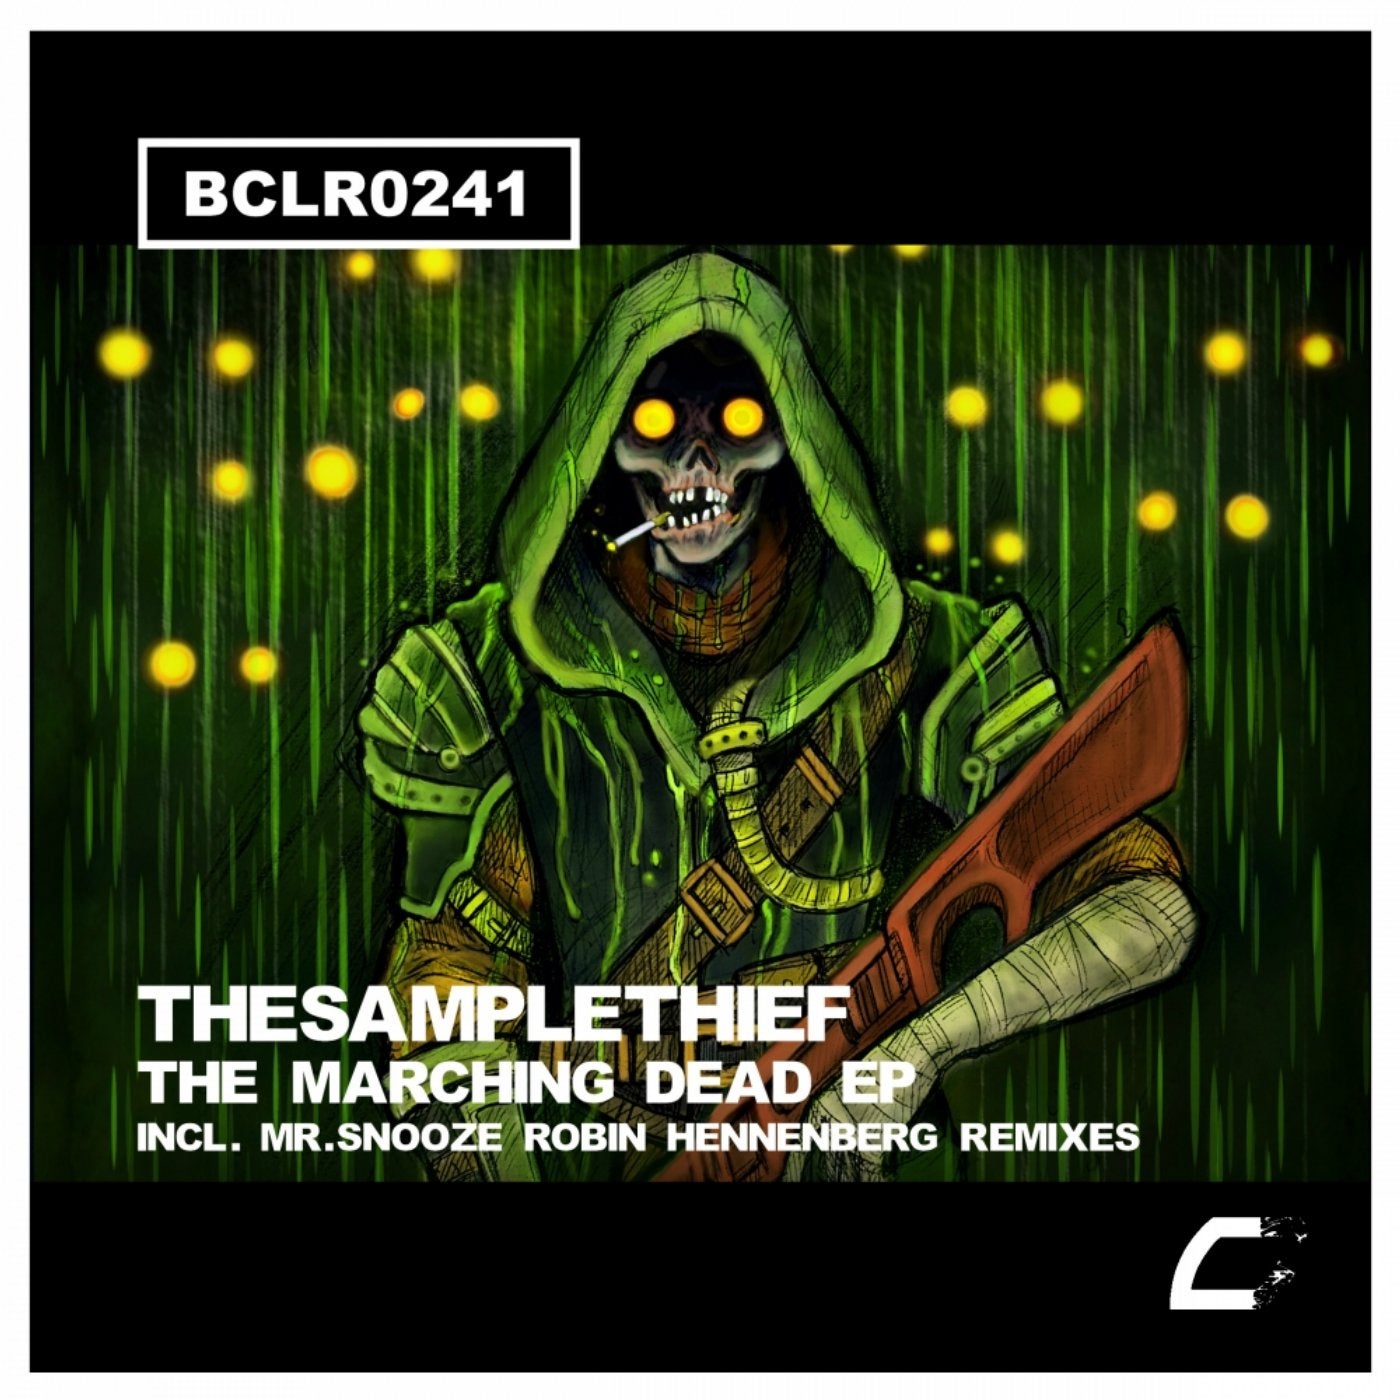 The Marching Dead EP